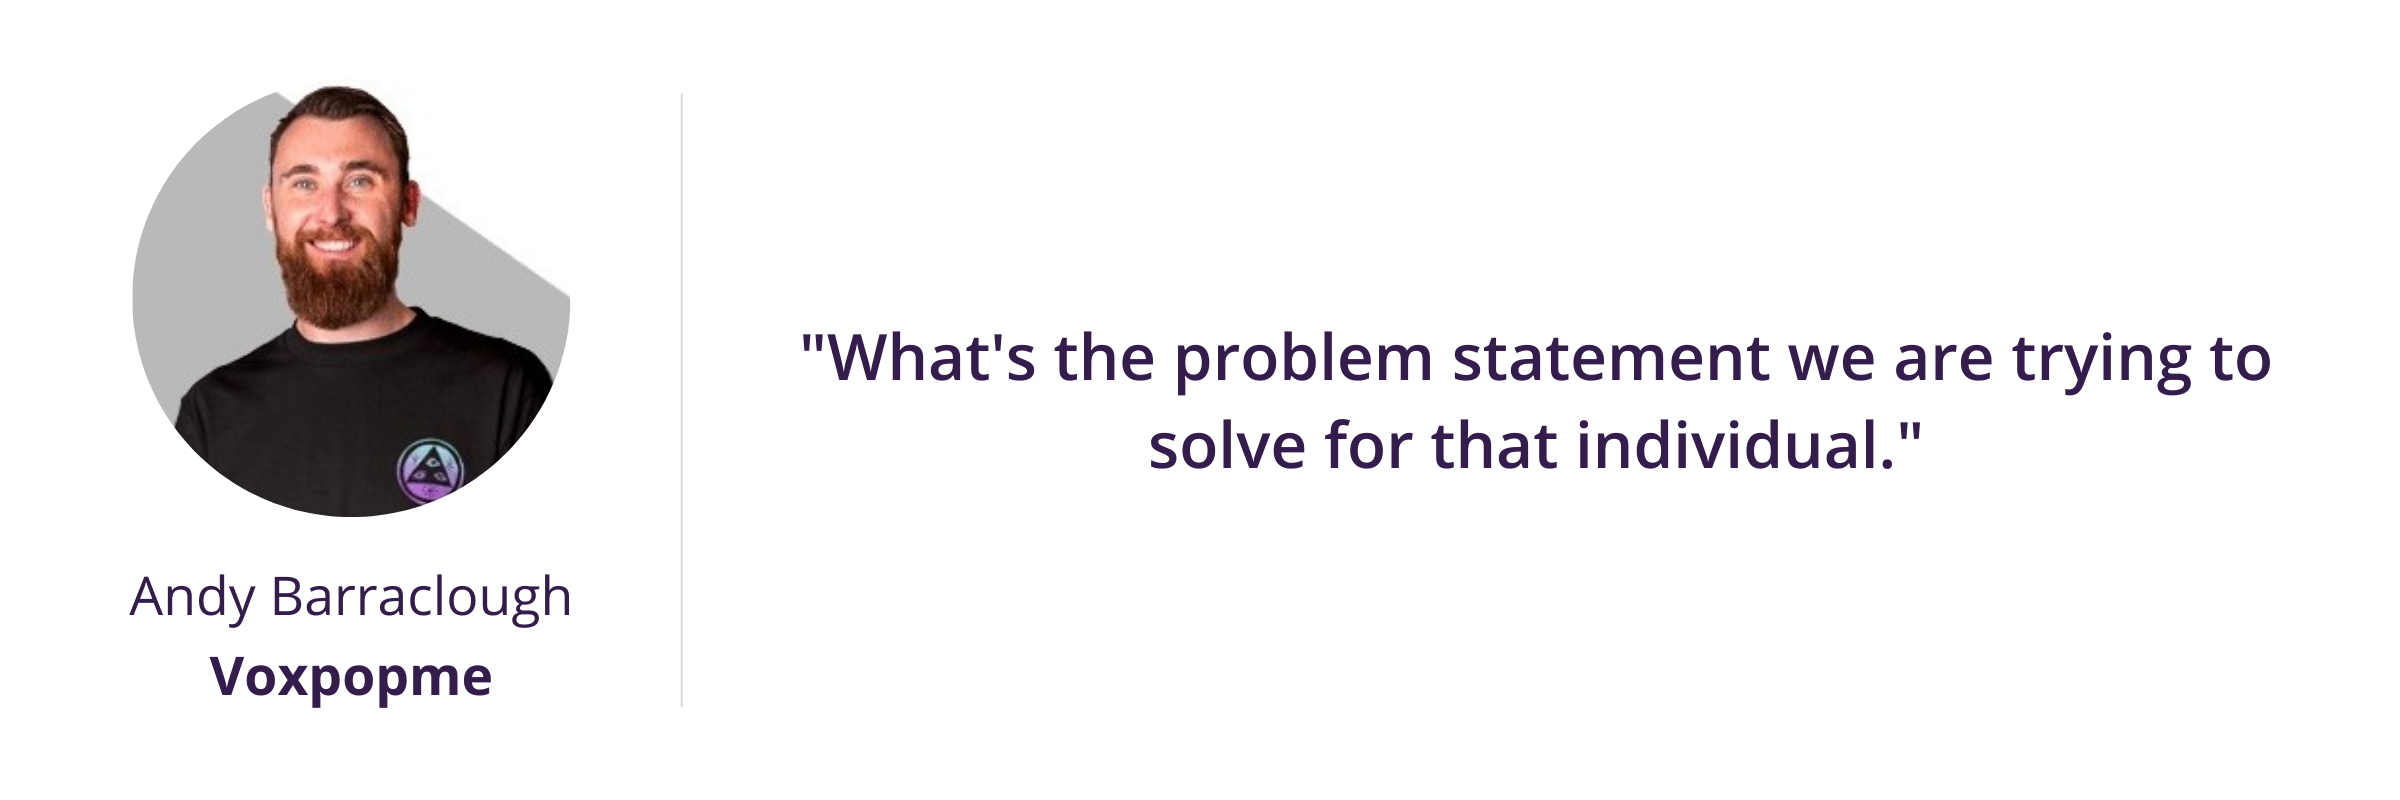 What's the problem statement we are trying to solve for that individual